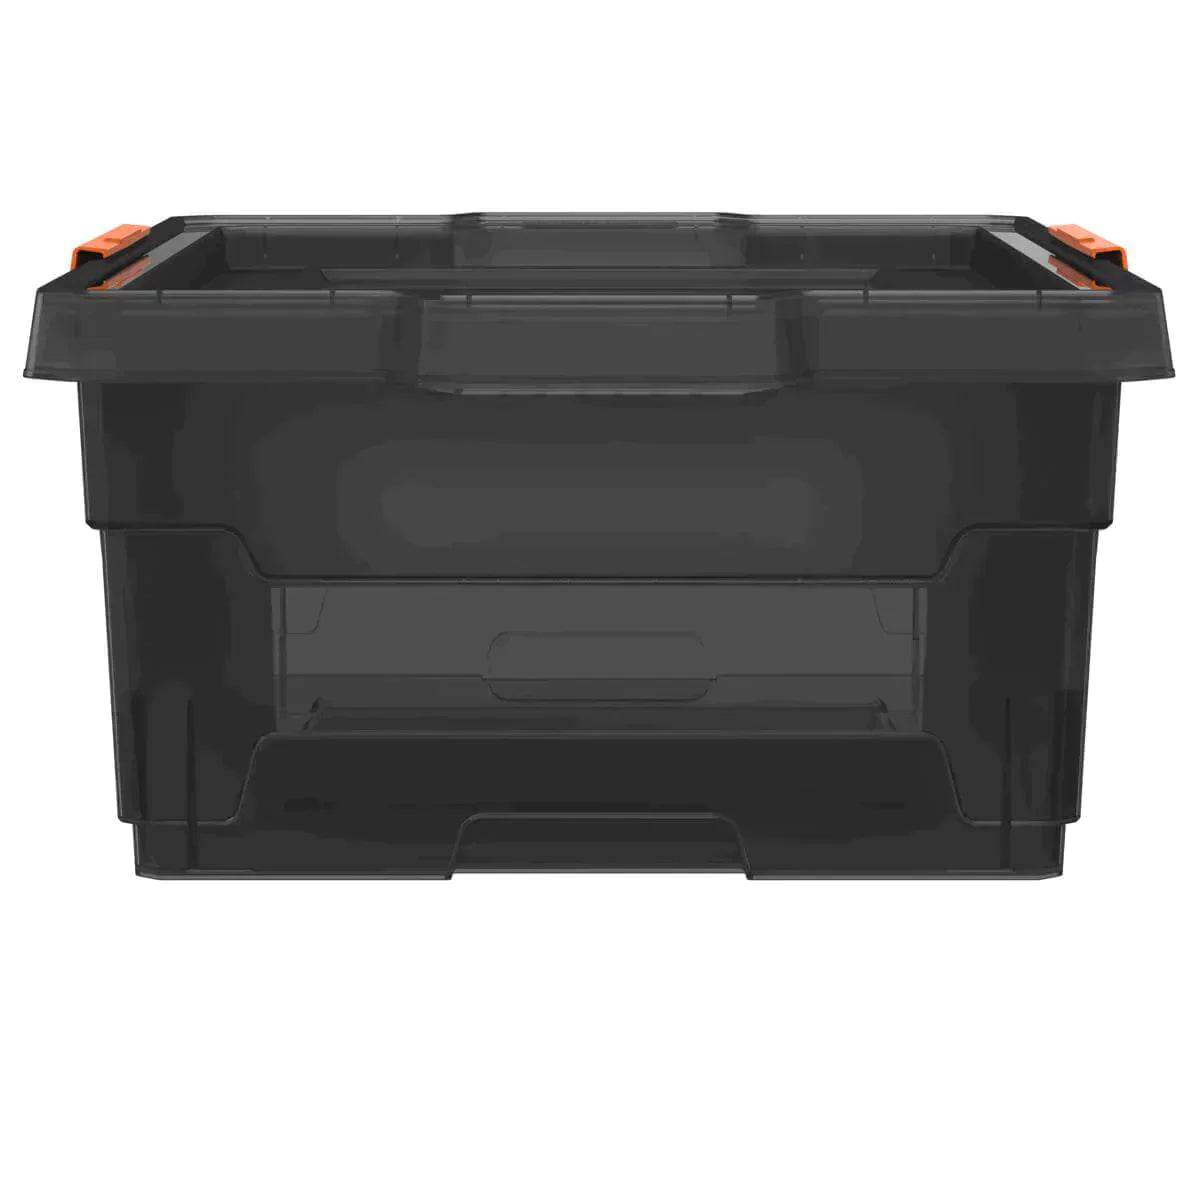 Buy affordable Heavy Duty Organizer Box 40L without Wheels by